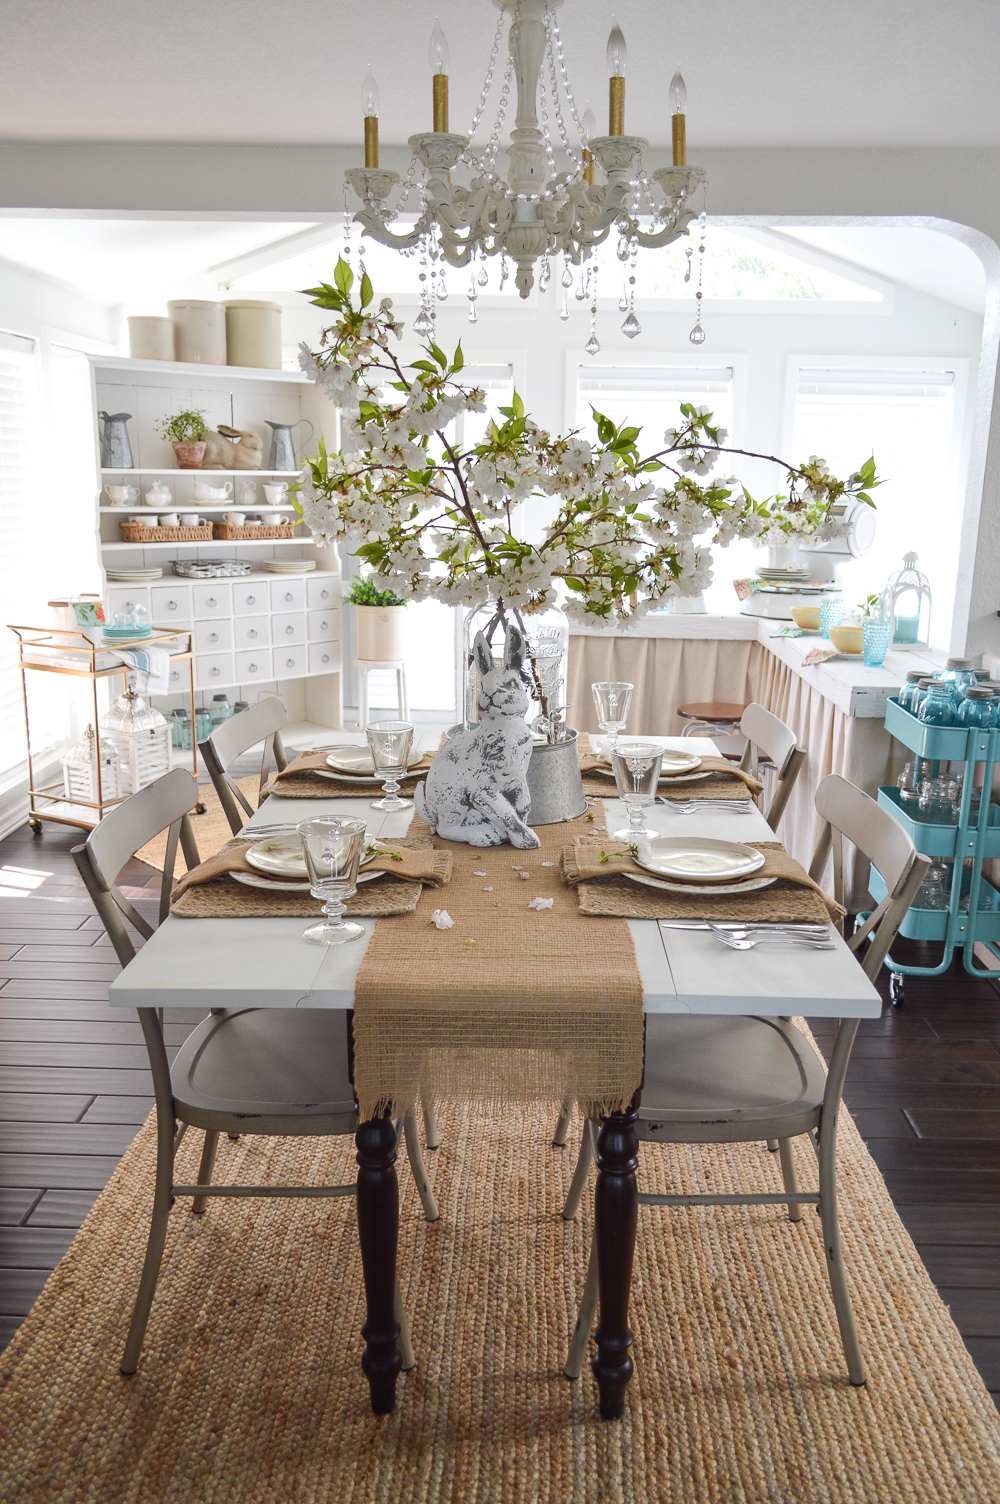 How To Style A Simple Summer Table Setting - Fox Hollow Cottage